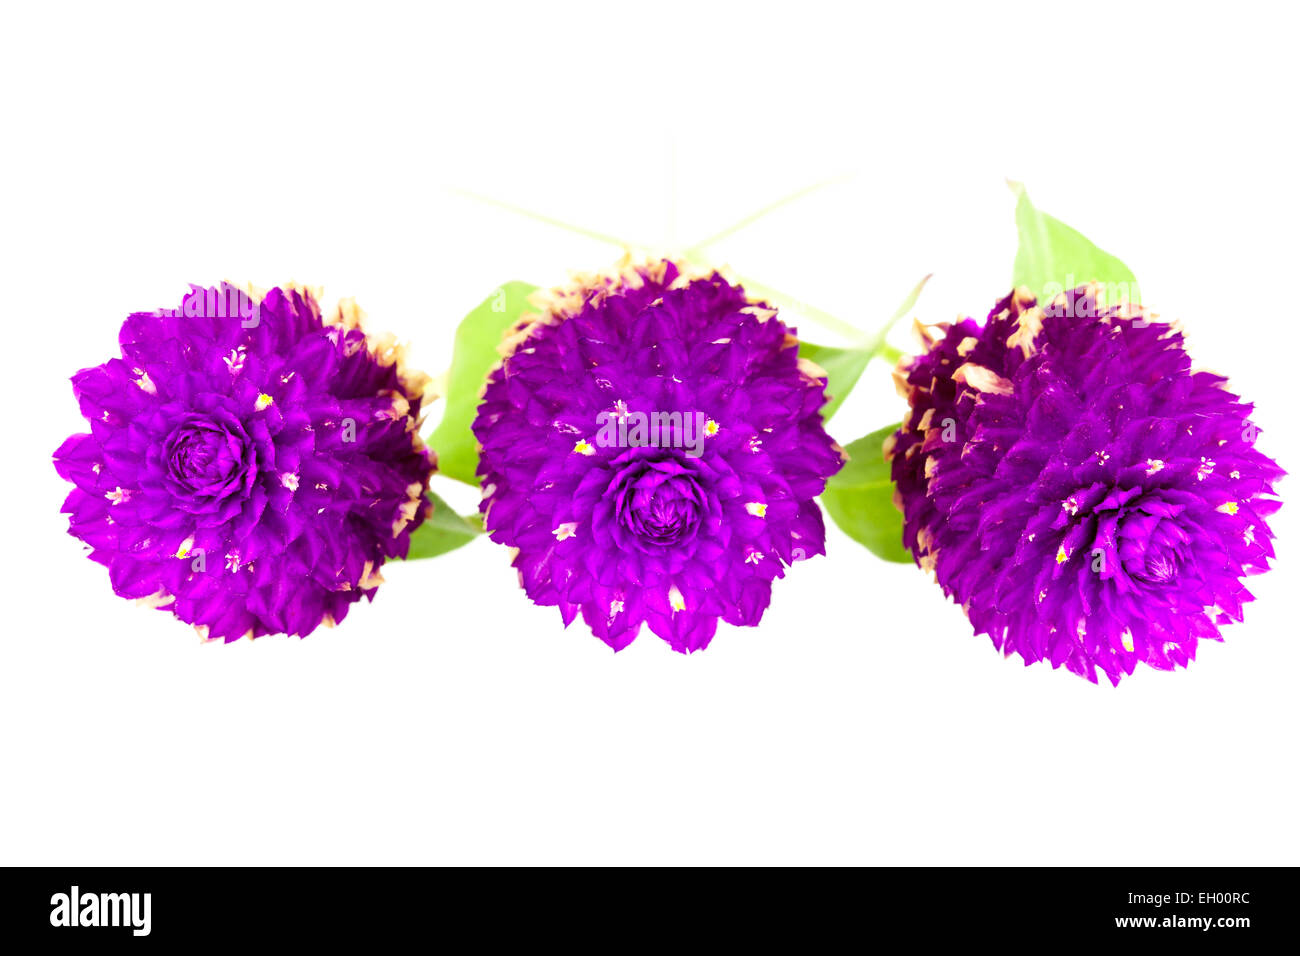 Globe Amaranth or Bachelor Button close up on white background Stock Photo